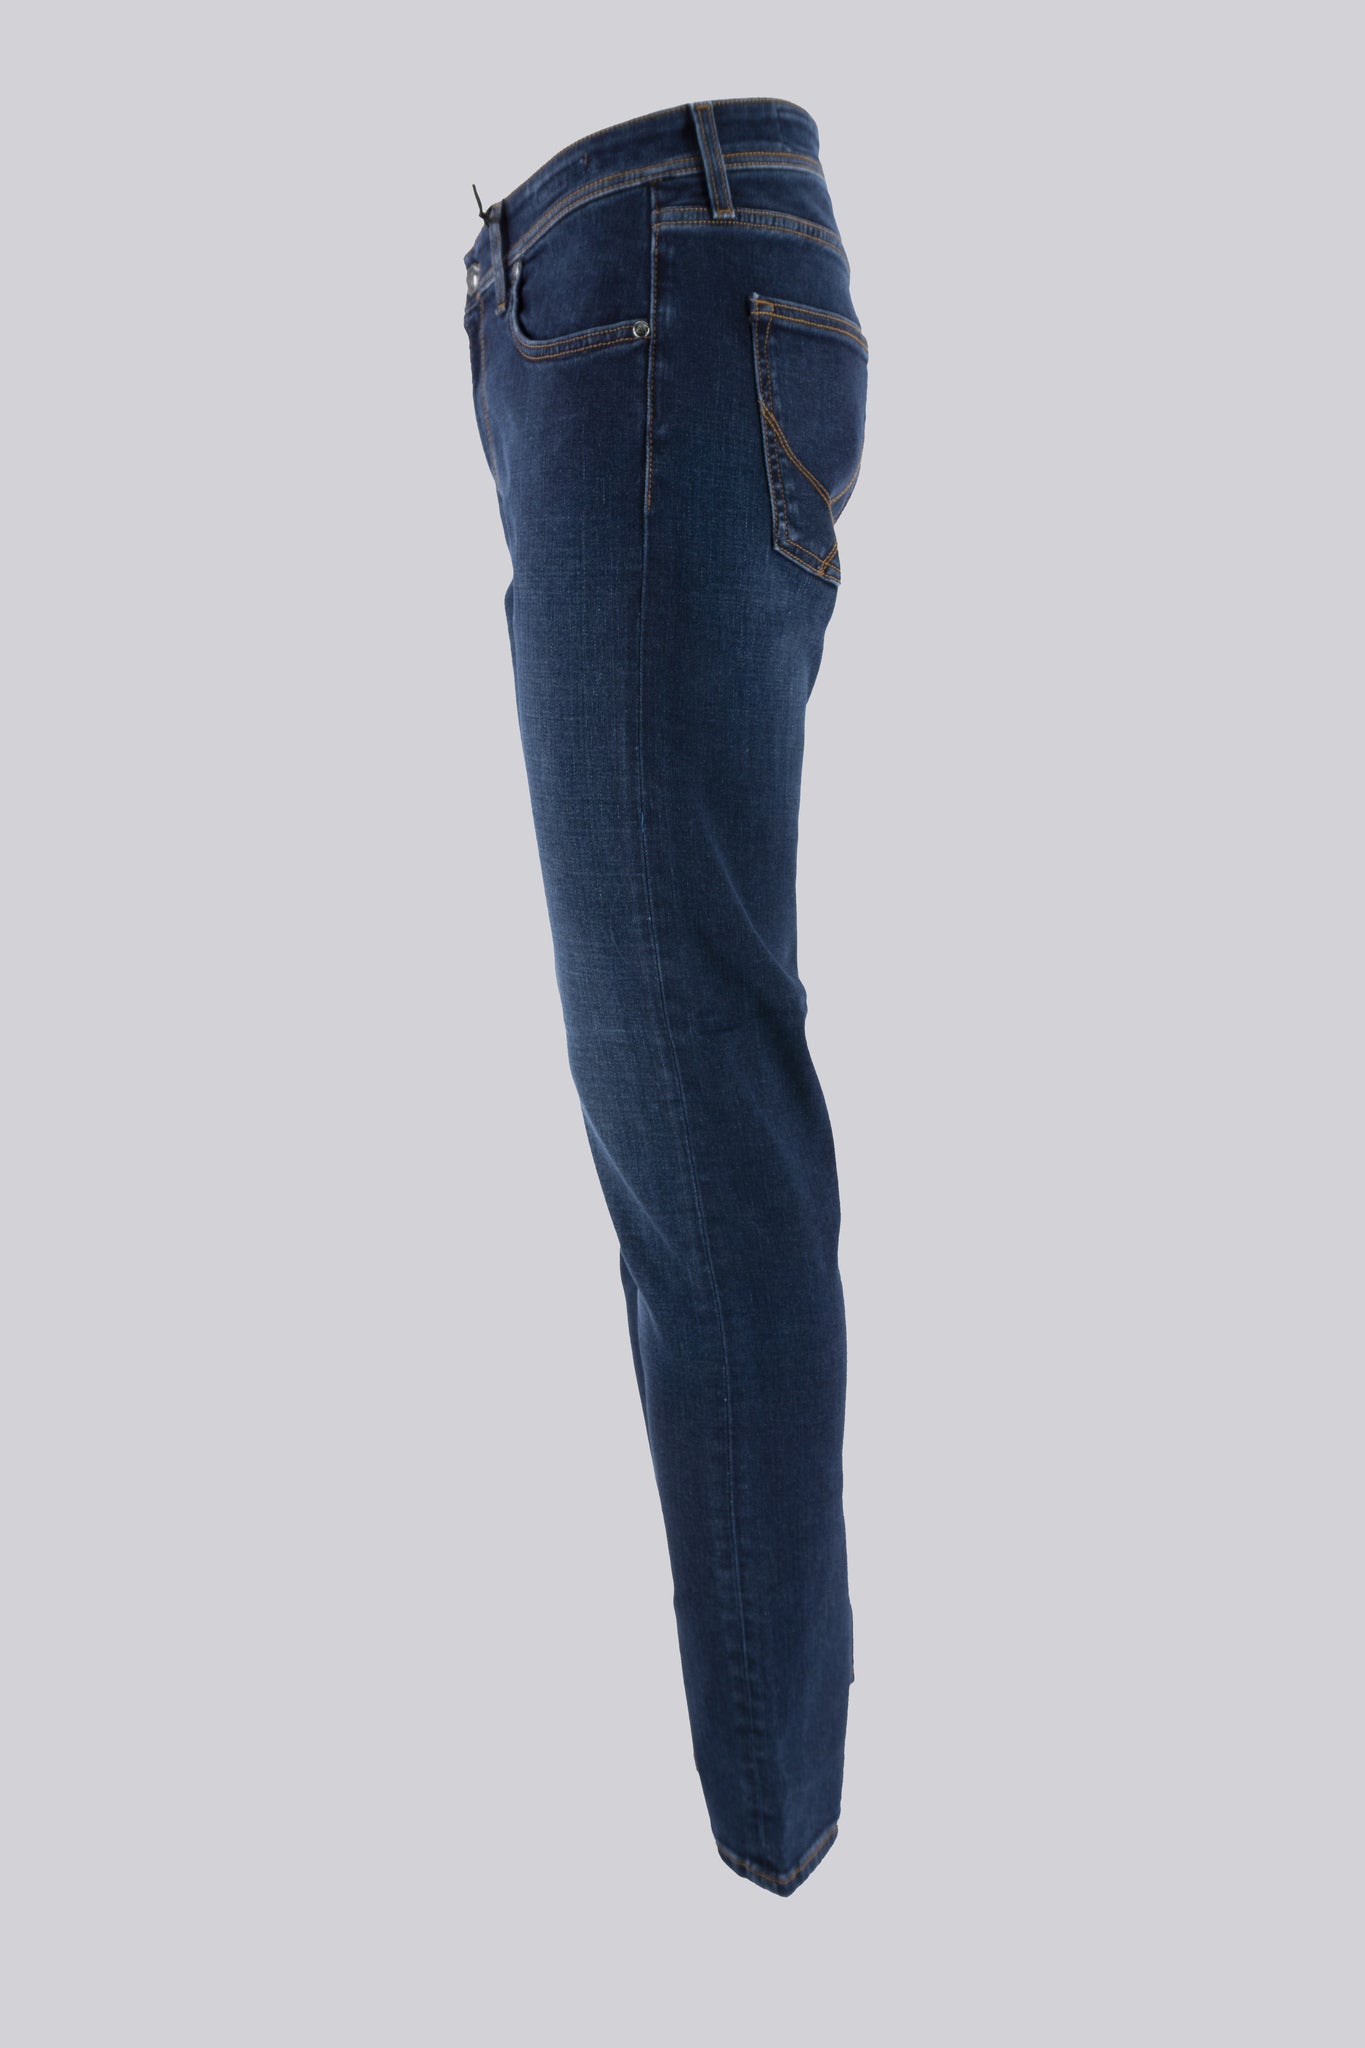 Jeans Lavaggio Scuro Isaac / Jeans - Ideal Moda